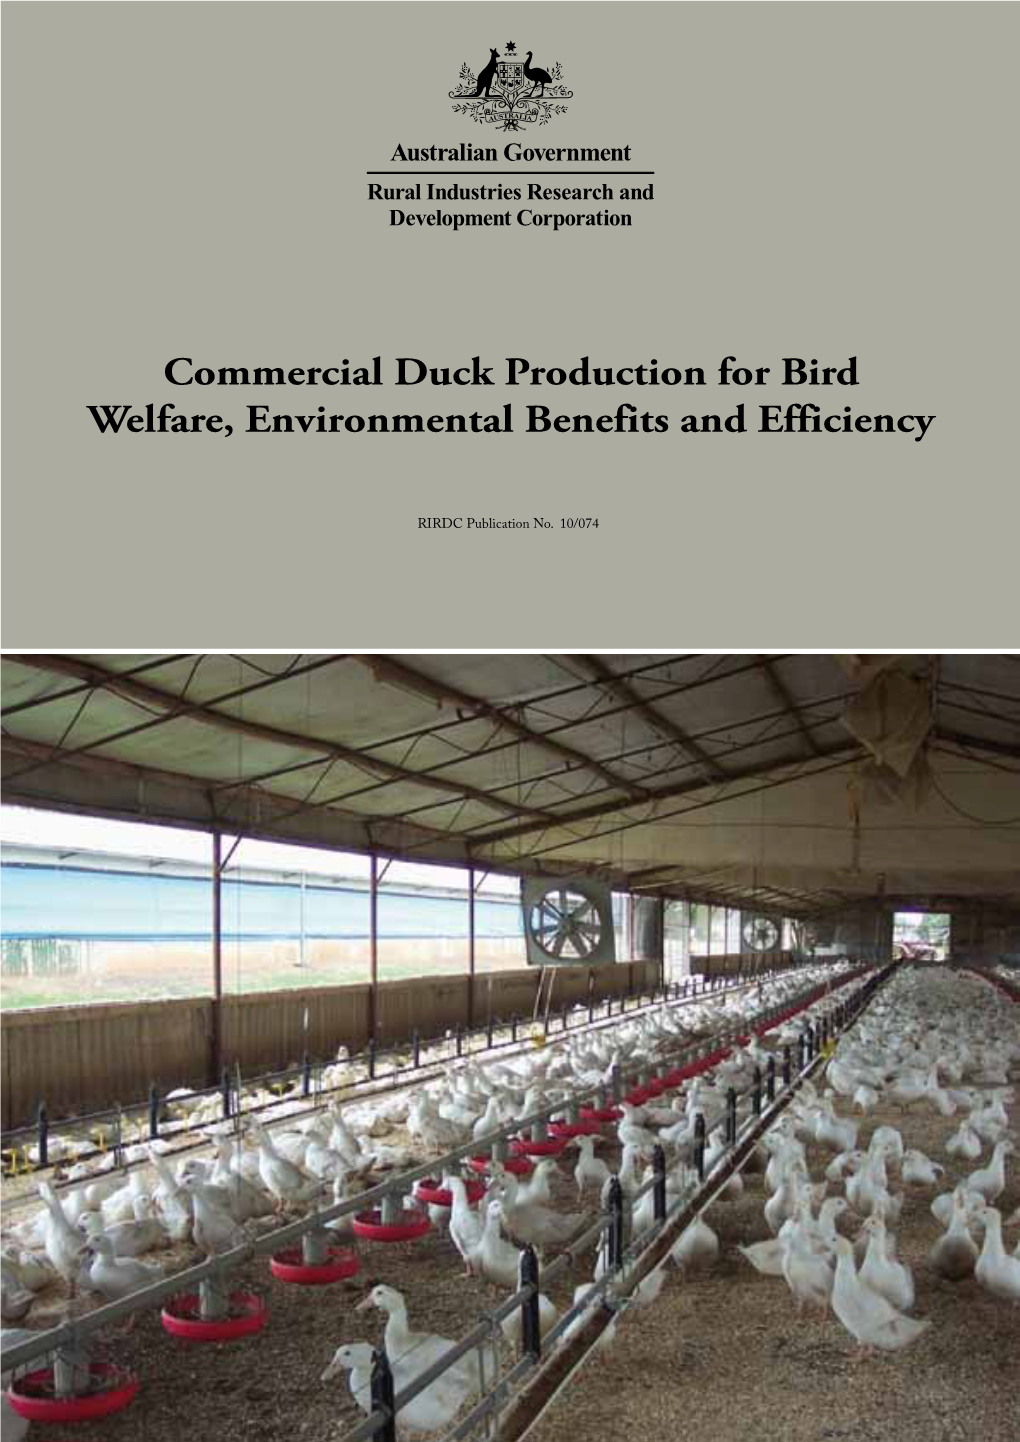 Commercial Duck Production for Bird Welfare, Environmental Benefits and Efficiency